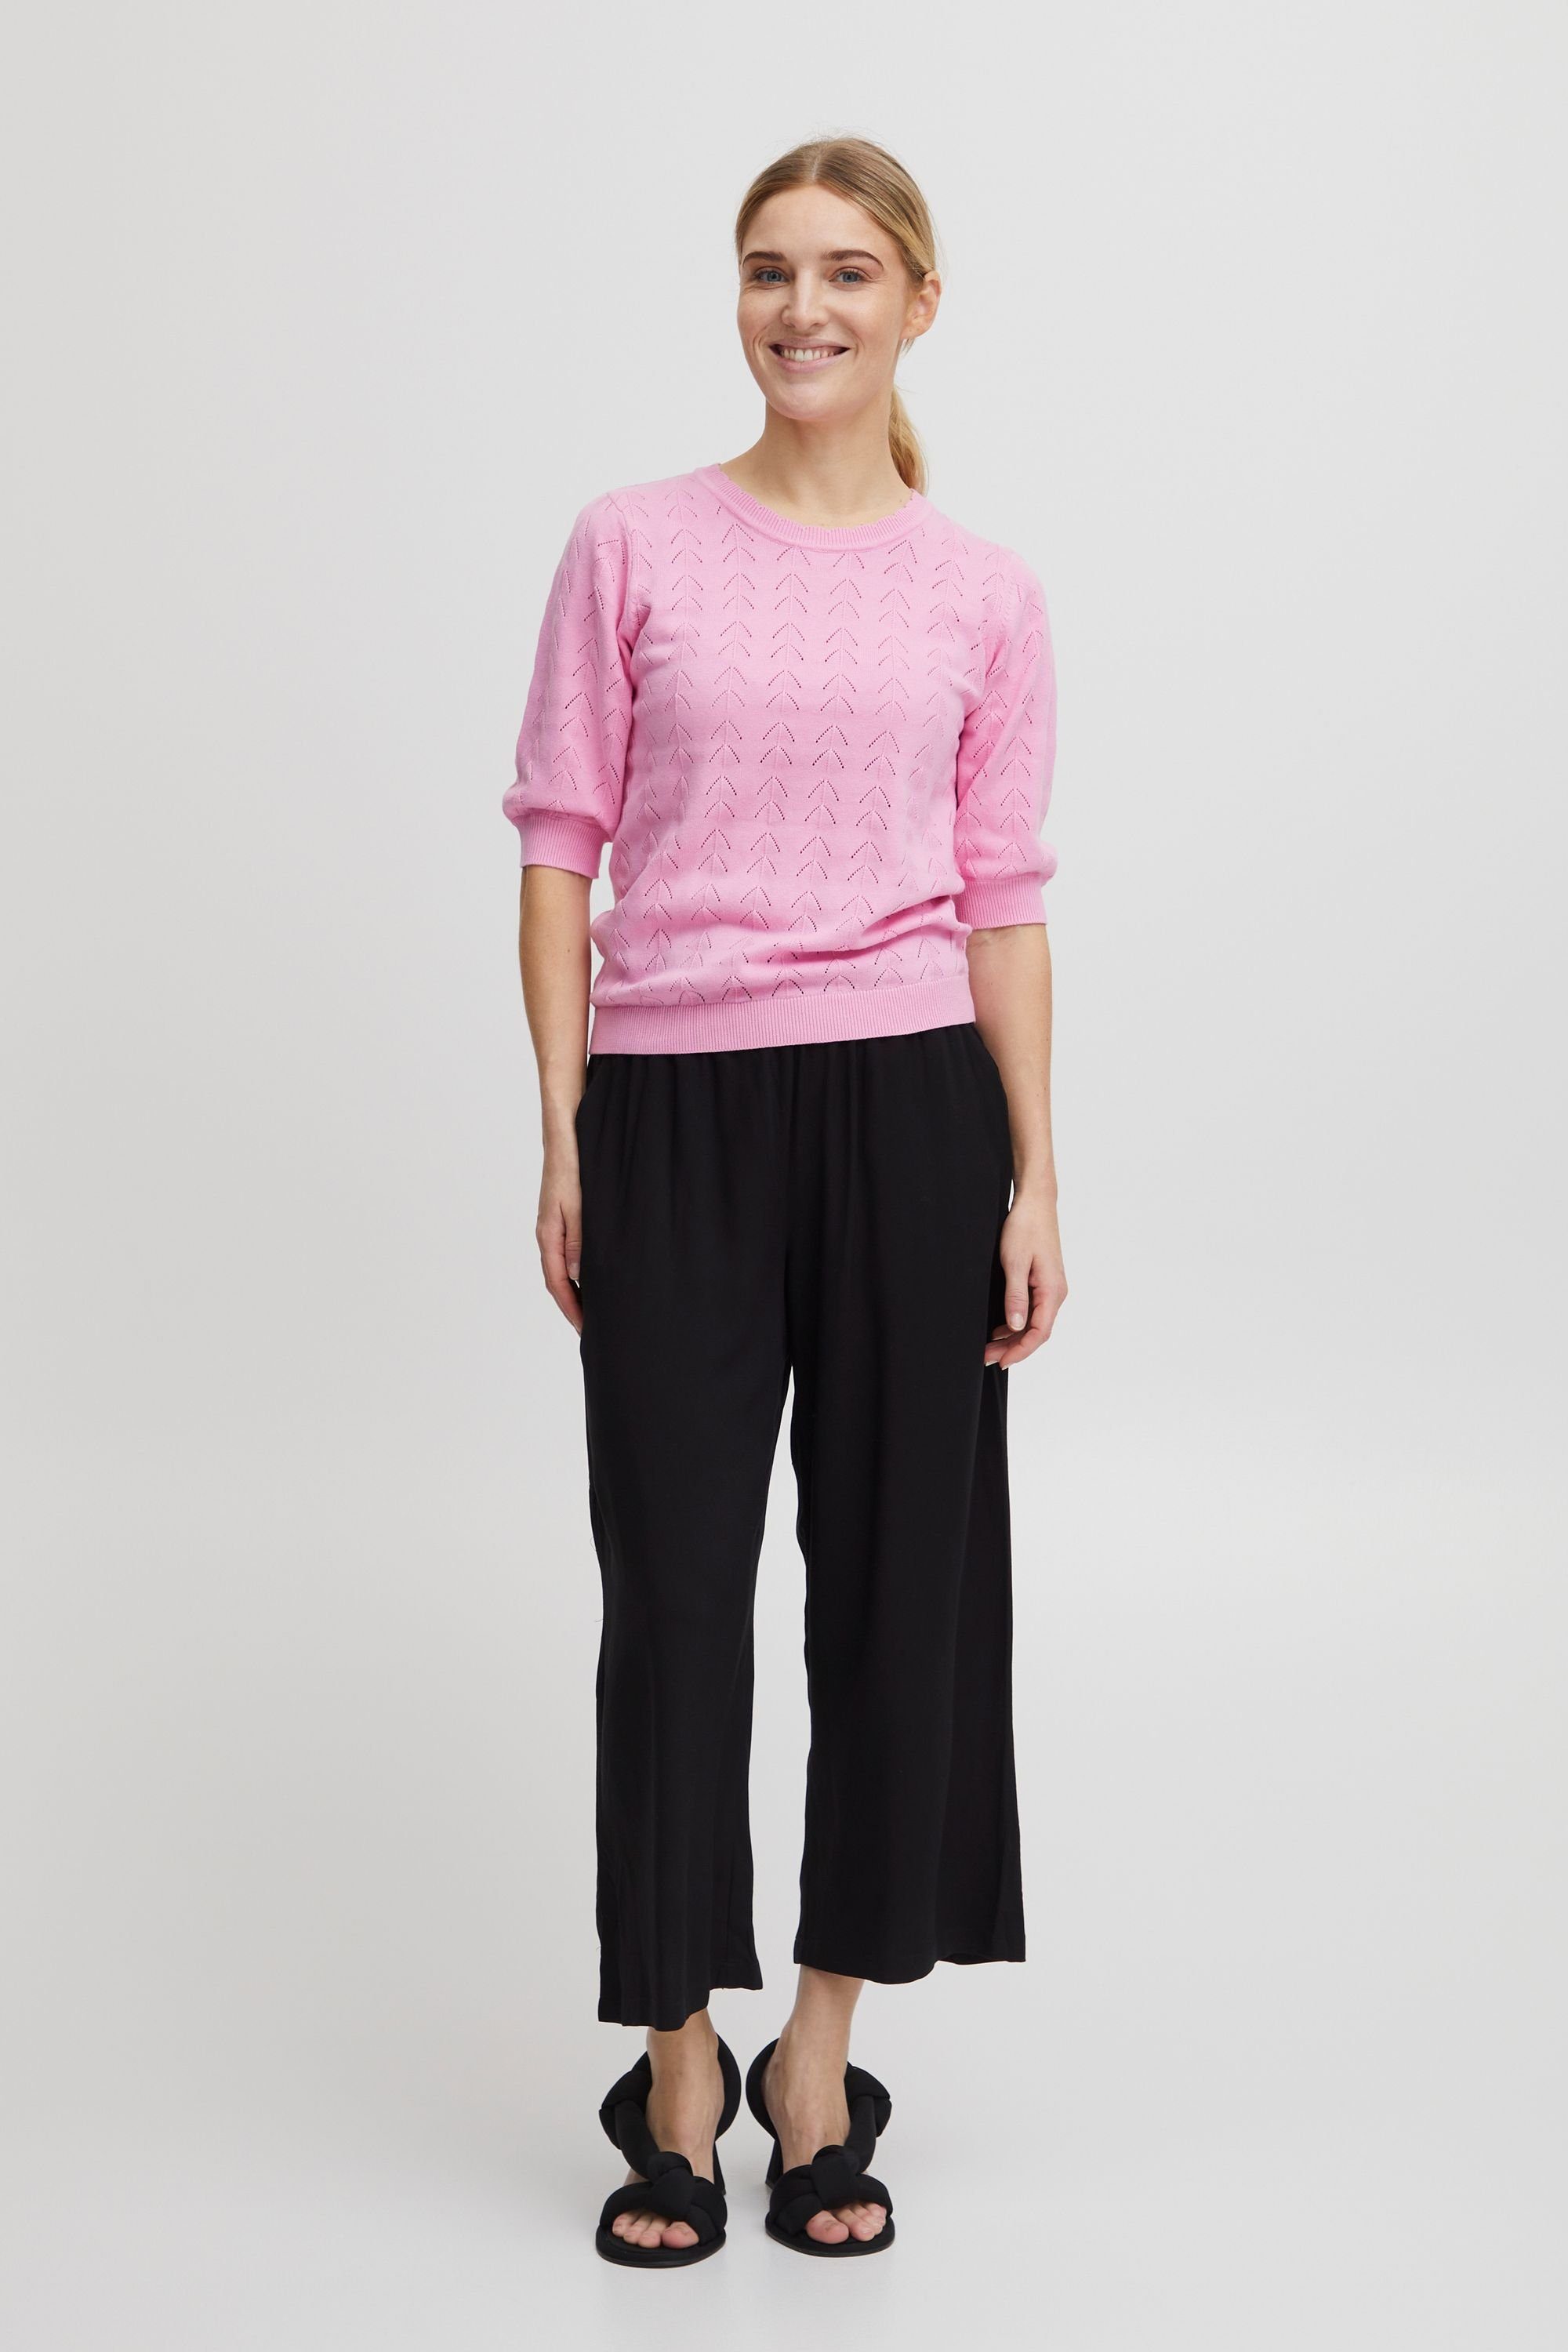 JUMPER (152215) - S Begonia Strickpullover b.young Pink 20813004 BYMONNI